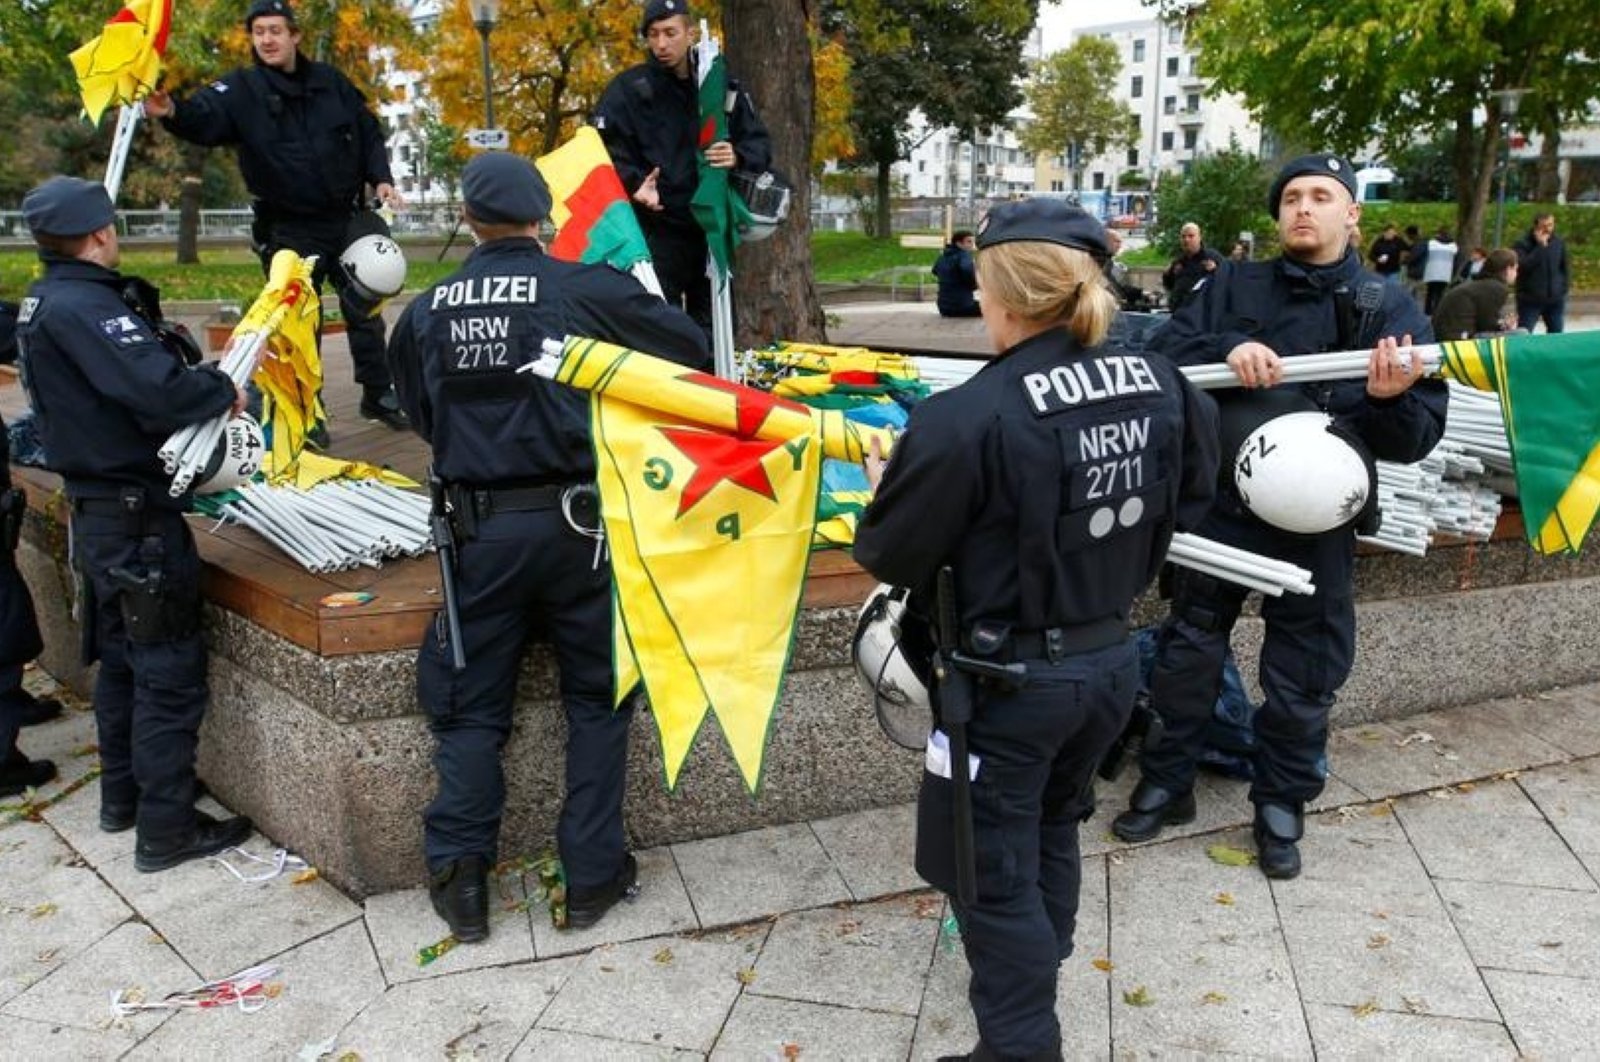 German police officers carry out security checks ahead of a pro-PKK demonstration in Cologne, Germany, Oct. 19, 2019. (Reuters Photo)